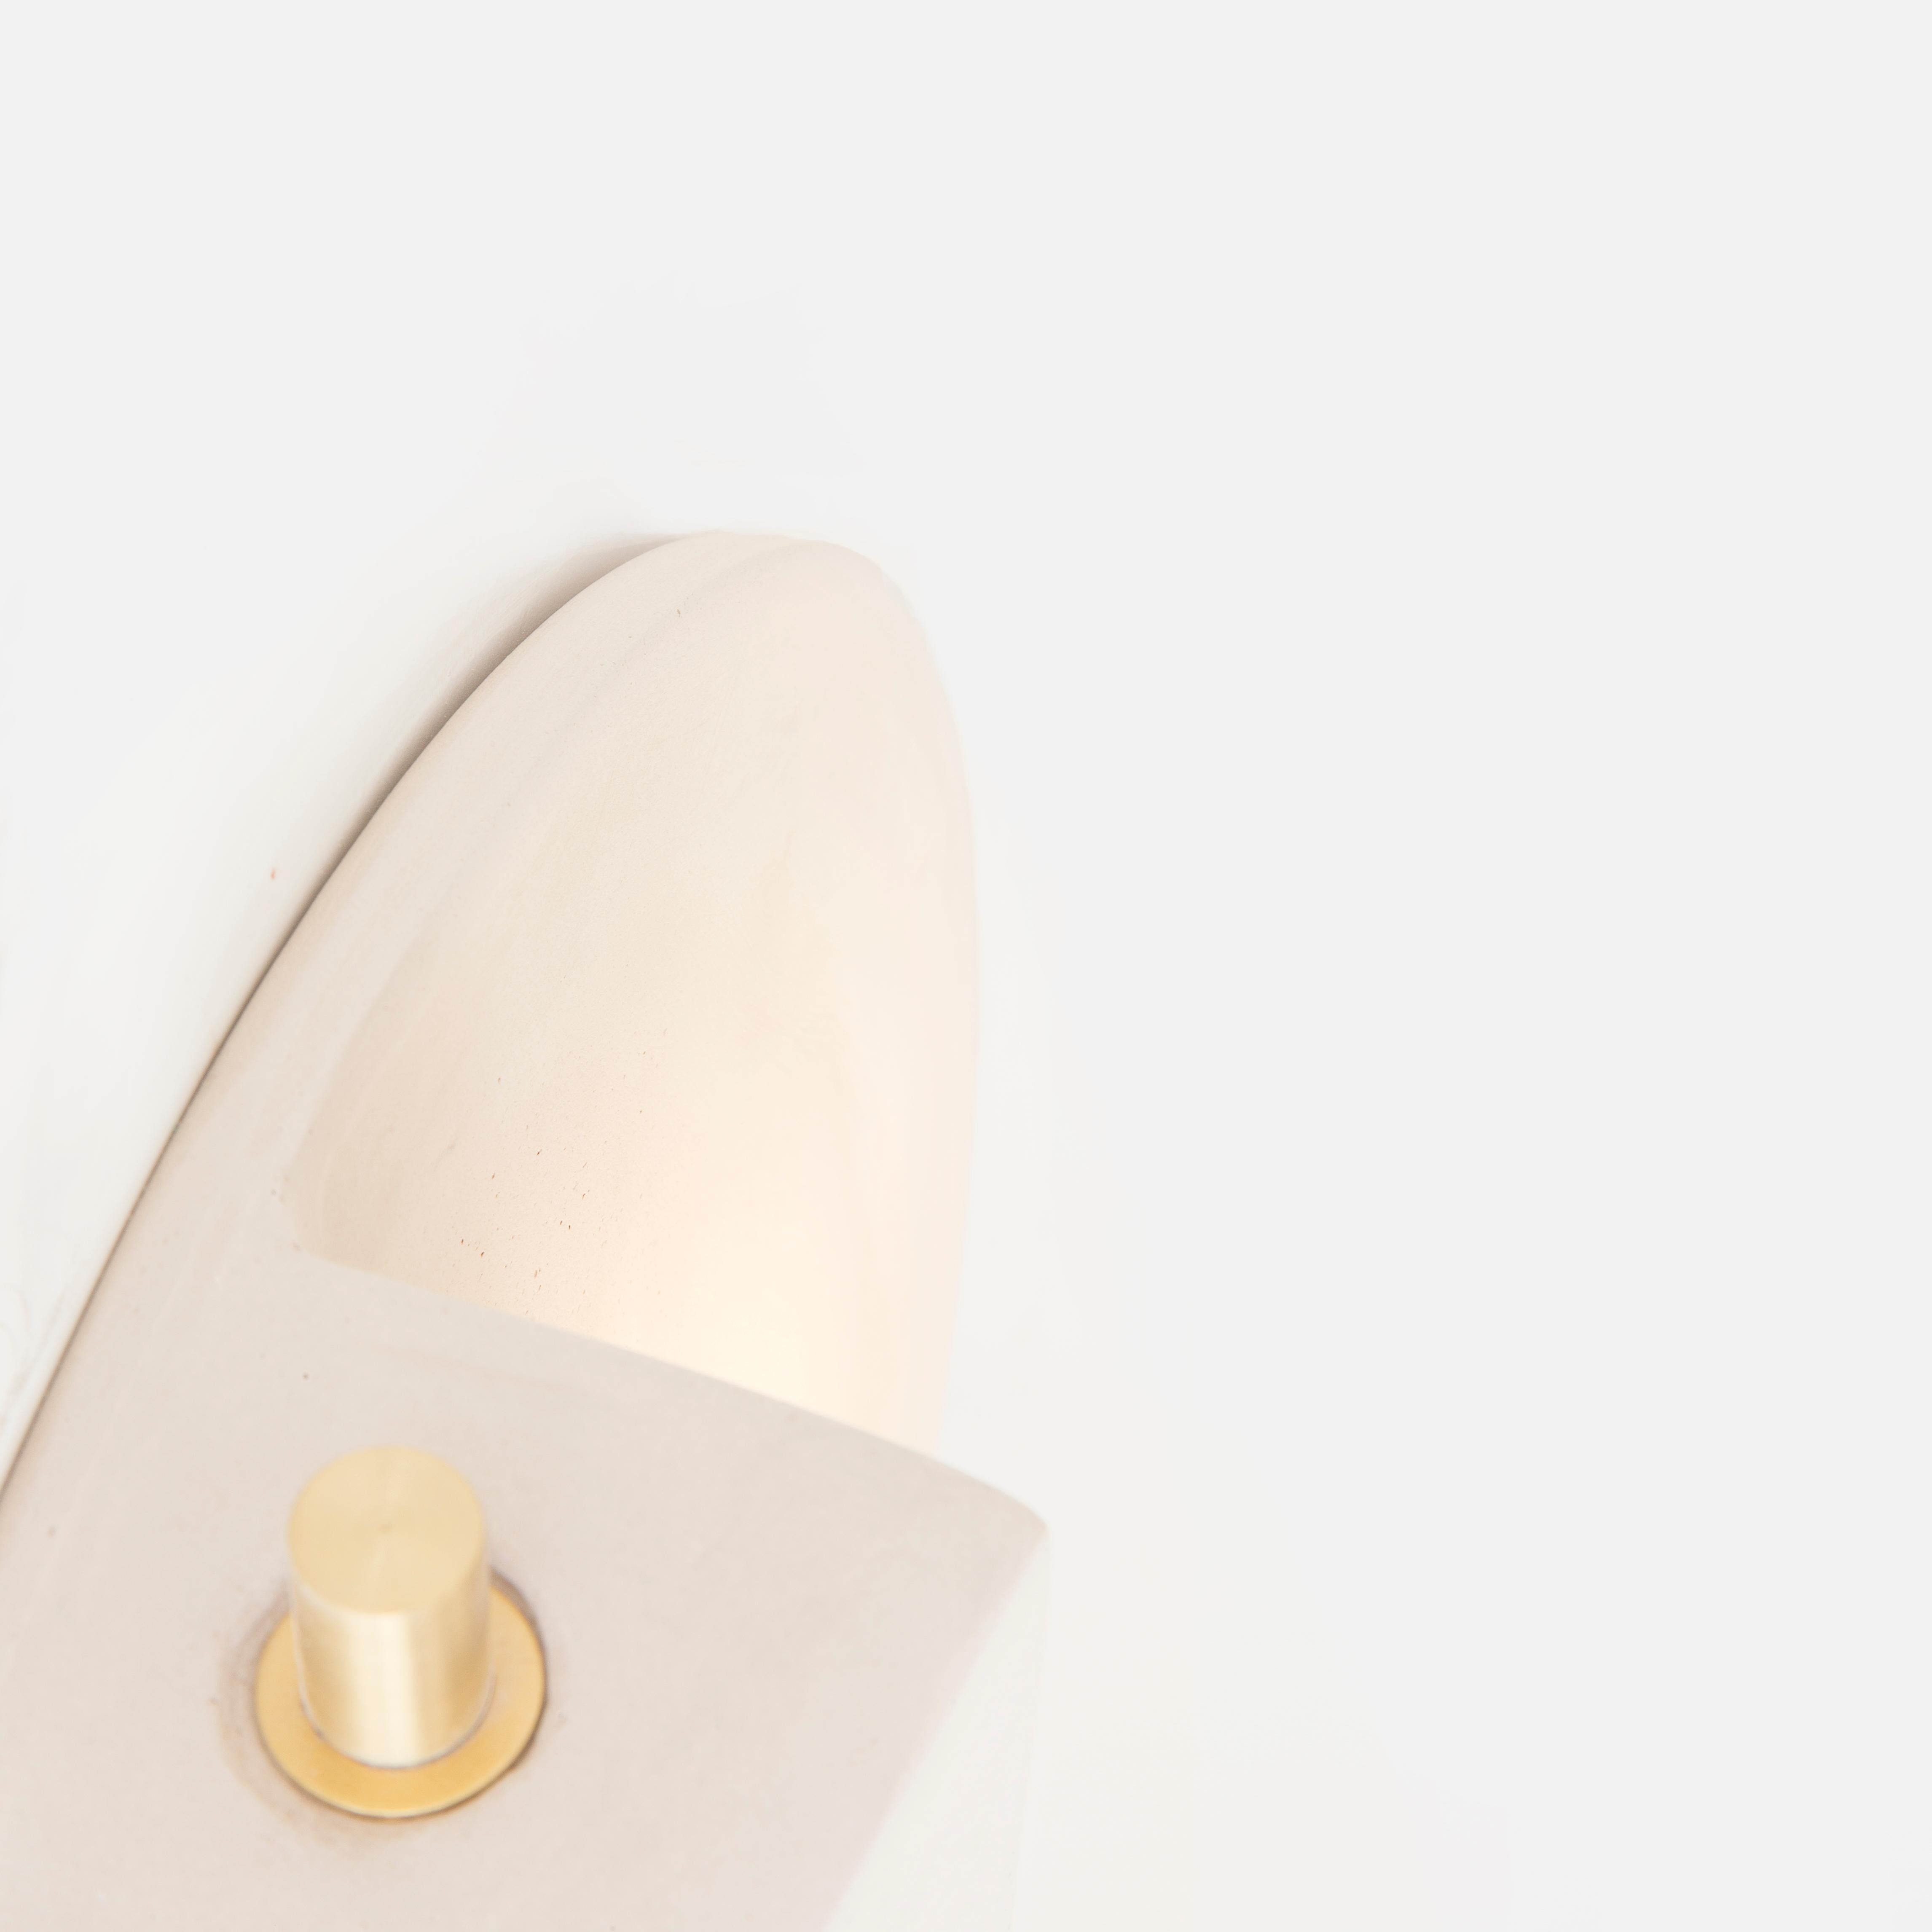 Brushed Handmade Minimalist Geometric Sconce, Natural Grey Ceramic and Brass, Brazil For Sale